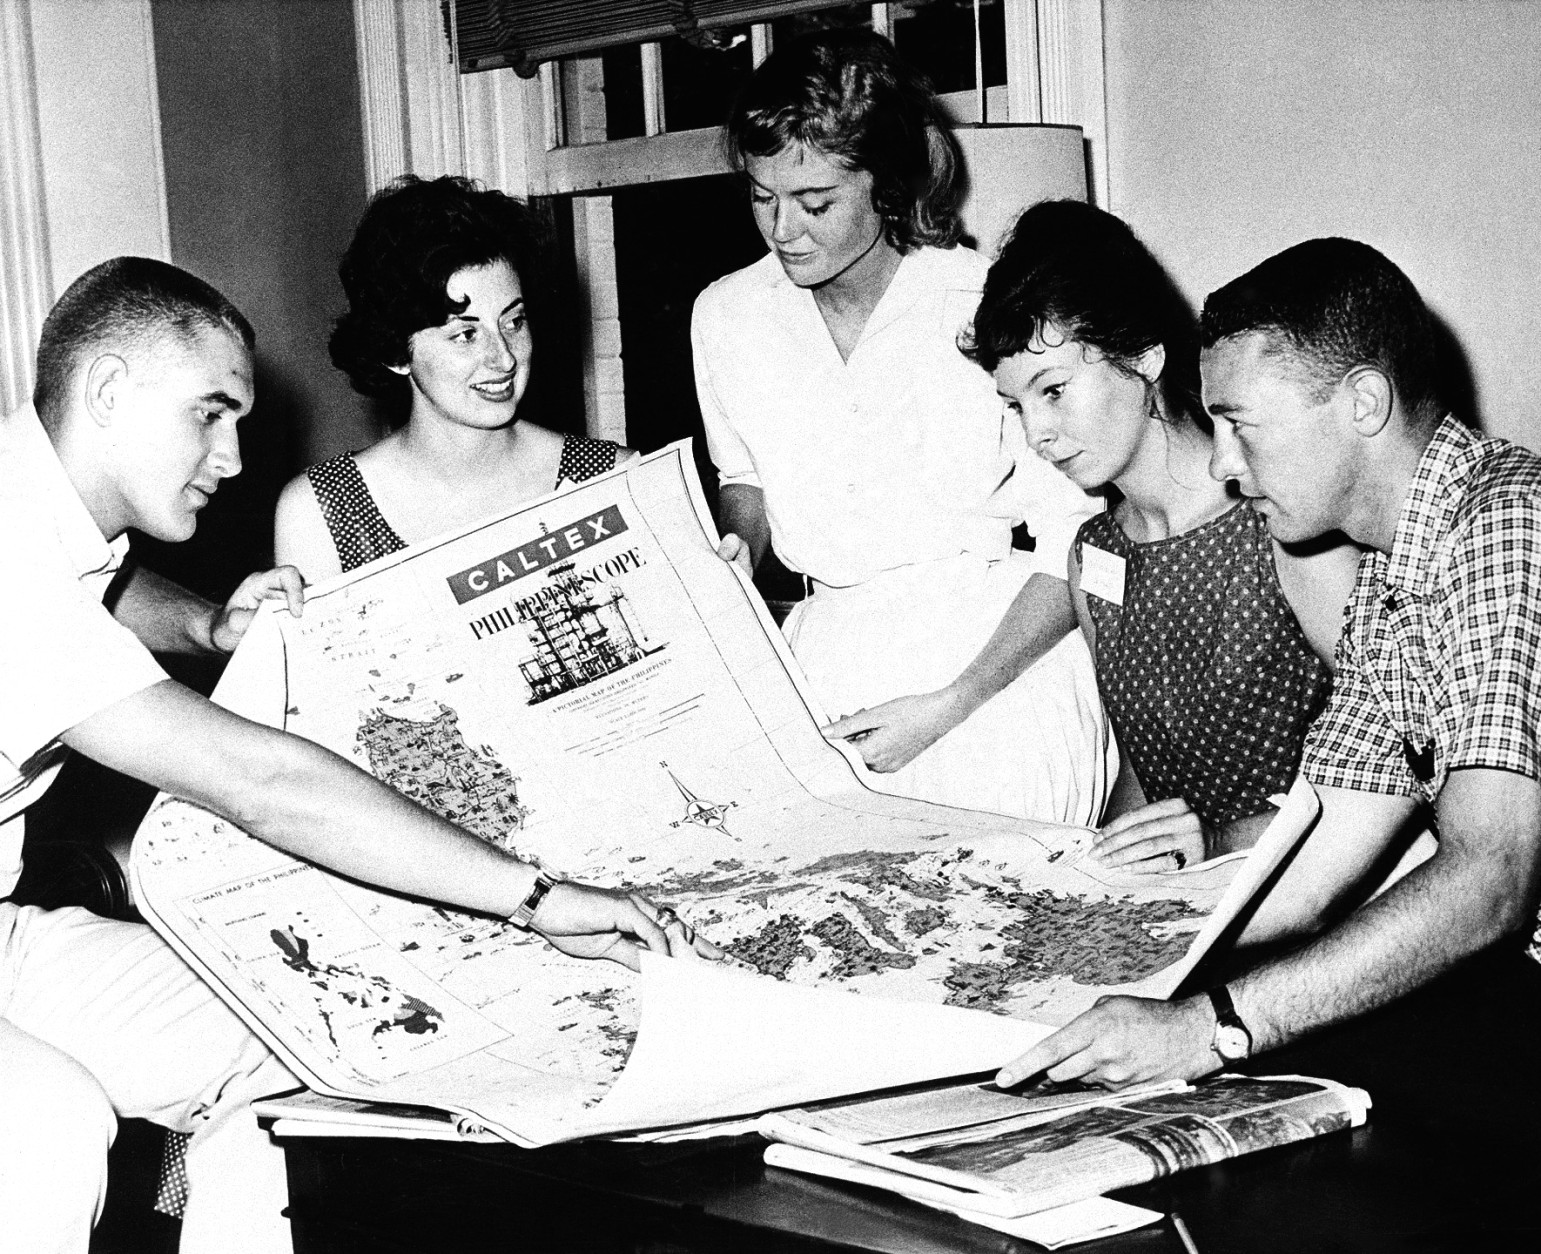 Five Peace Corps trainees, part of the 160 candidates that have reported at Pennsylvania State University for a seven-week training schedule, look at a map of the Philippine Islands in University Park, Pa. on July 31, 1961. The trainees will go there upon completion of training as teaching assistants in rural elementary schools. From left to right, Stuart Taylor, Berkeley, Calif.; Clair Ann Whiting, Cincinnati; Sandra Gay Williams, El Paso, Texas; Jenifer Grant, Armonik, N.Y.; David Pierson, Greenfield, Mass. (AP Photo/Paul Vathis)